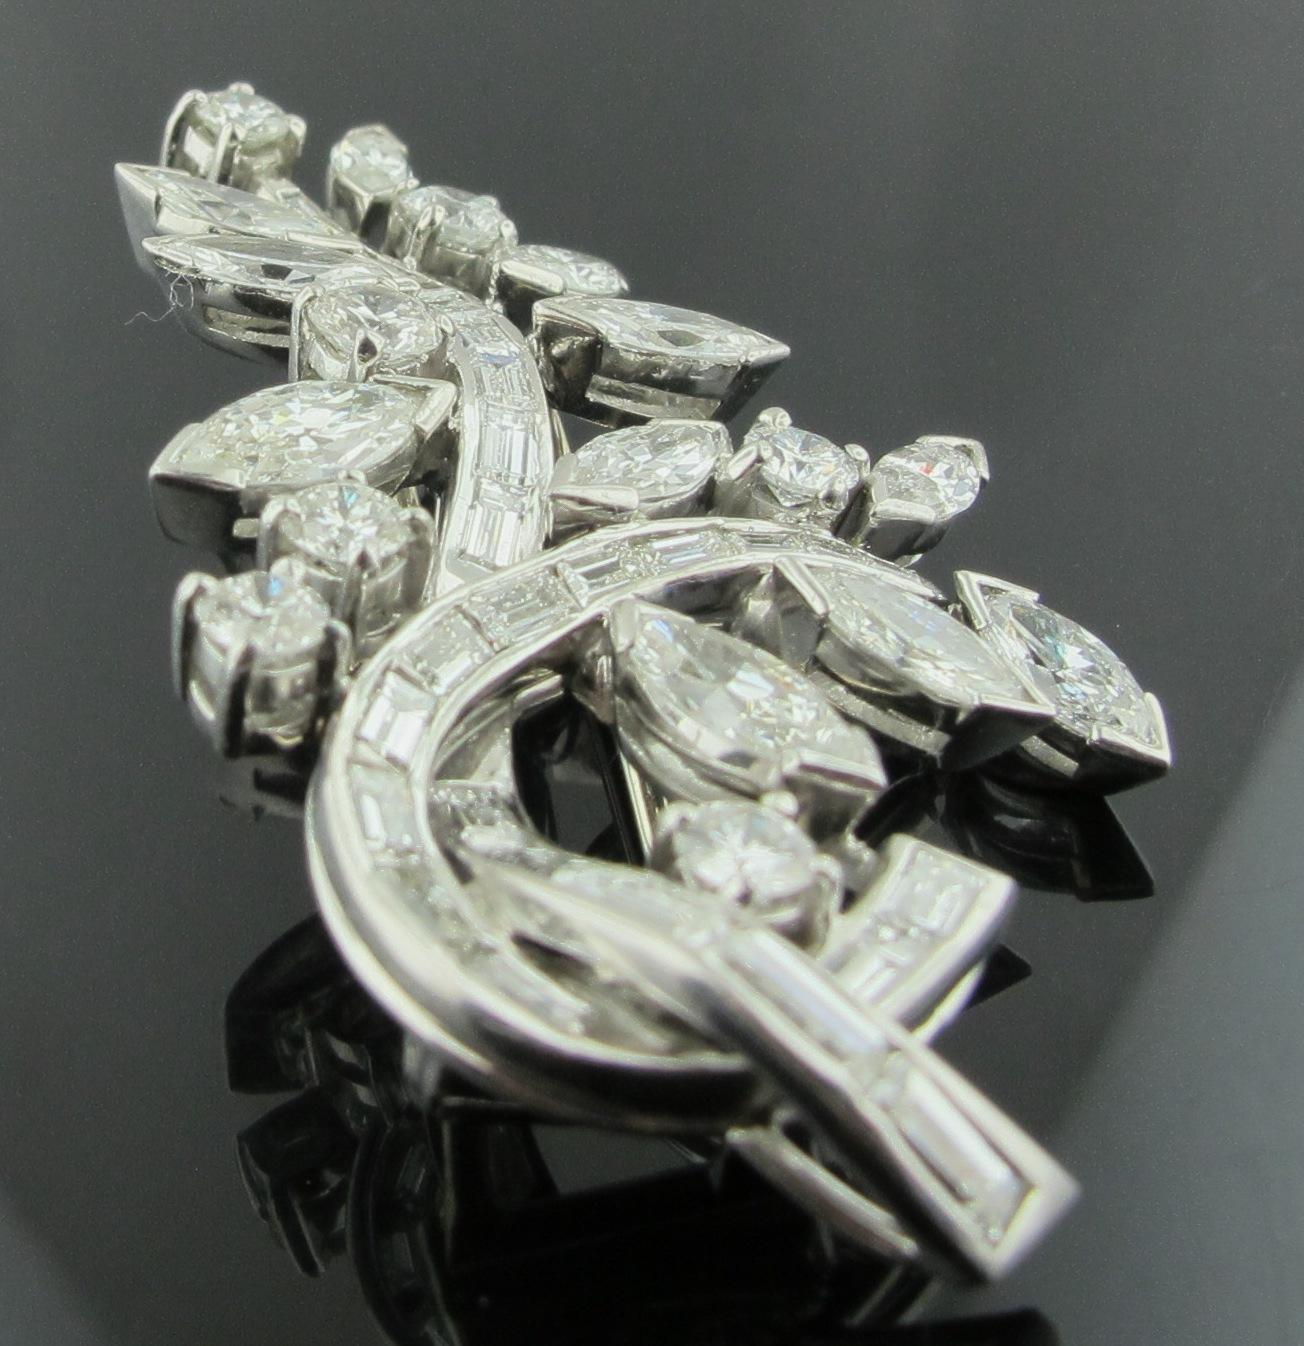 Platinum & Diamond brooch featuring round brilliant cut, marquise and baguette diamonds with a total diamond weight of approximately 7 carats. H-I color, VS